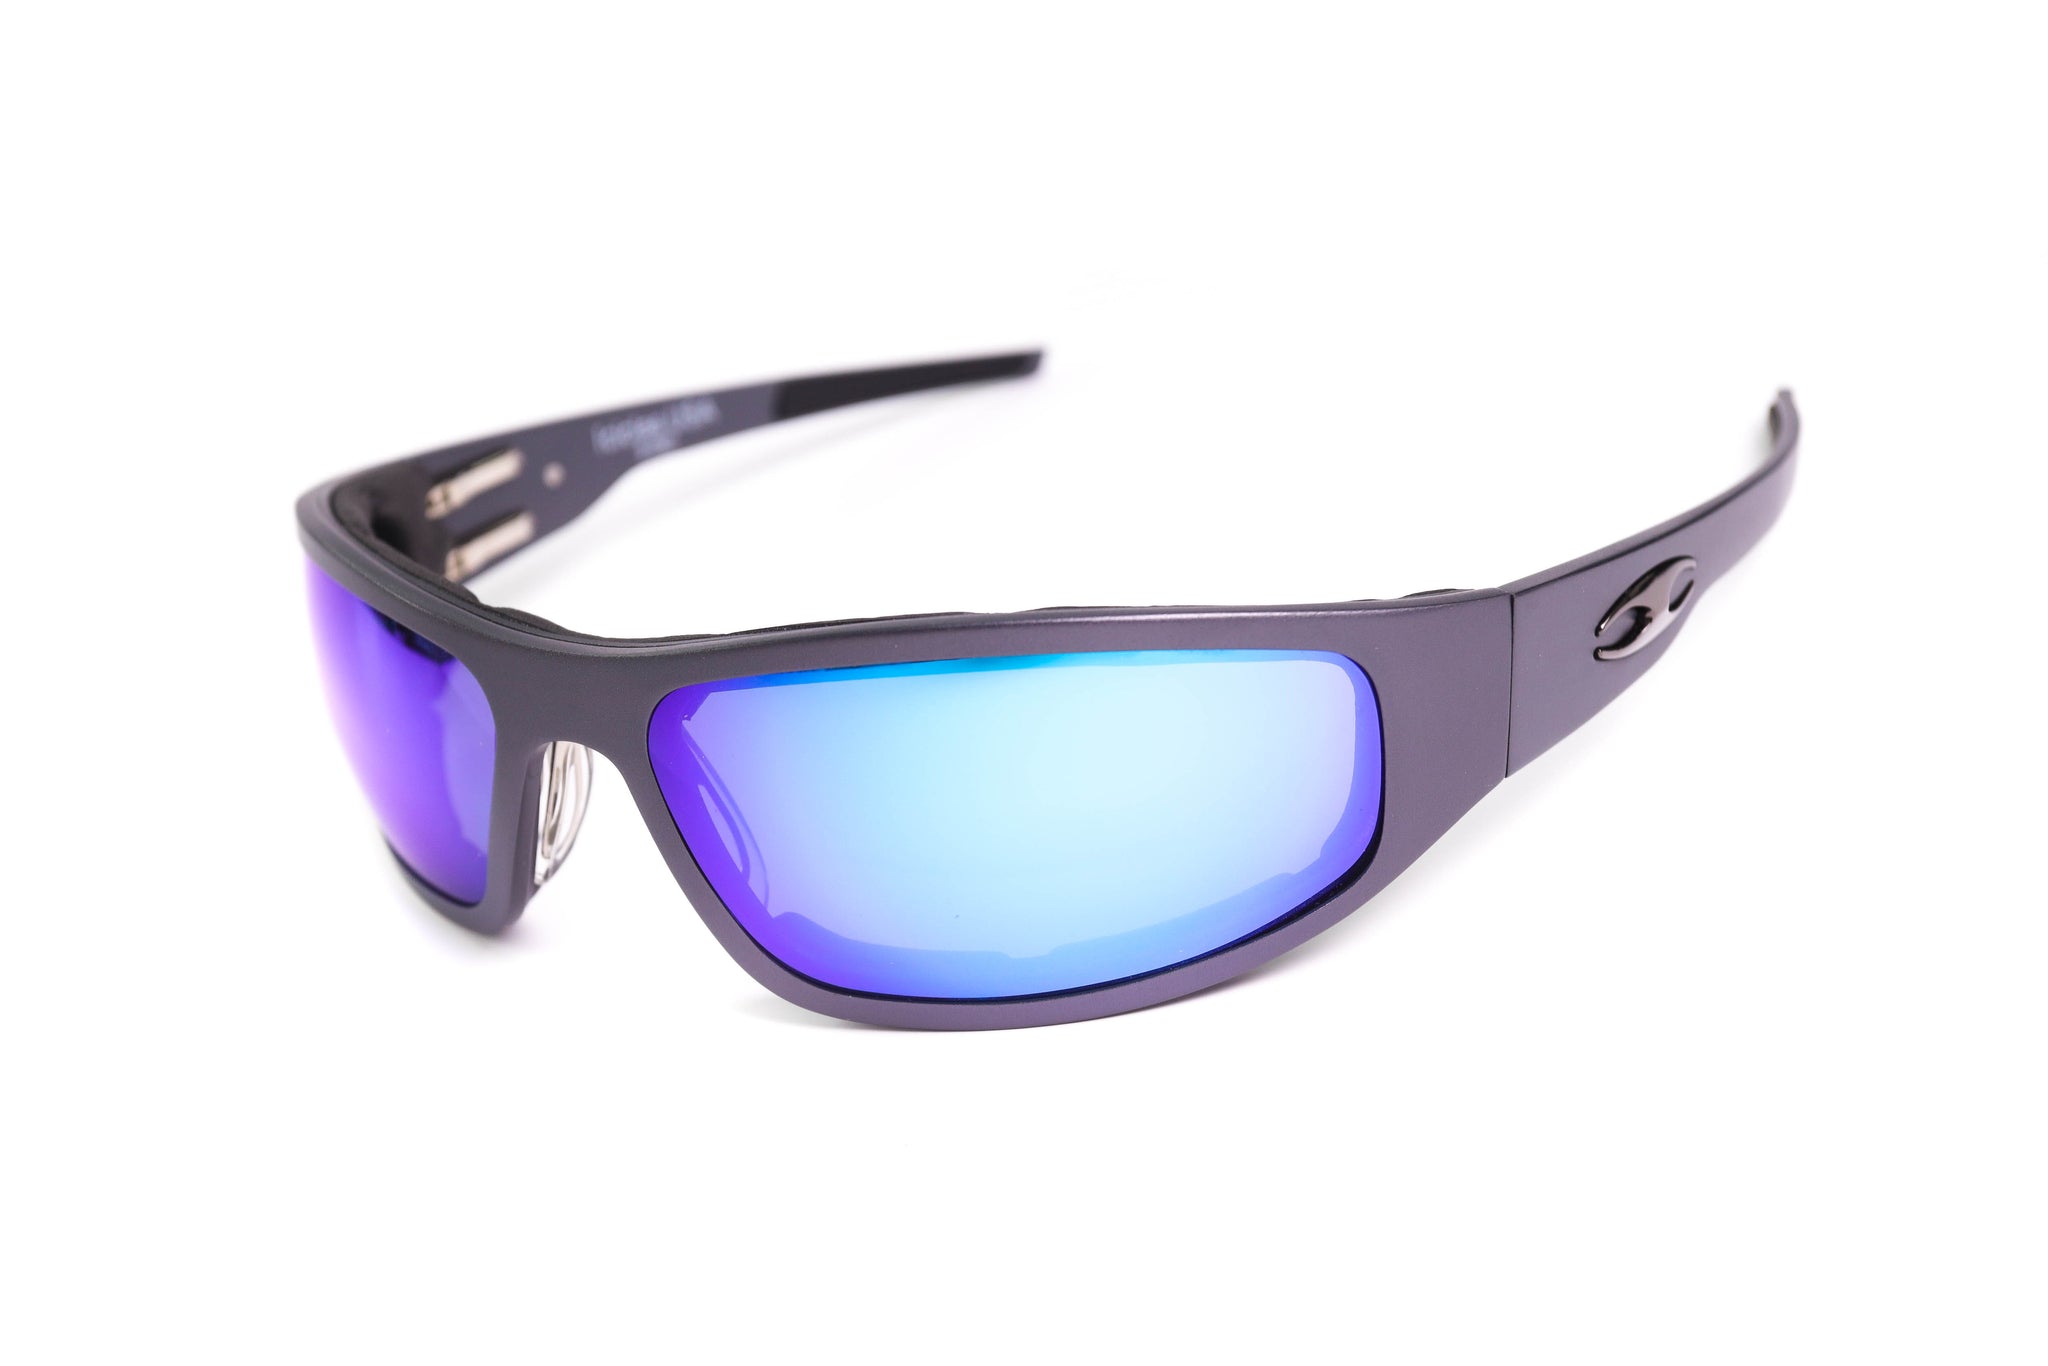 Motorcycle Riding Glasses & Sunglasses